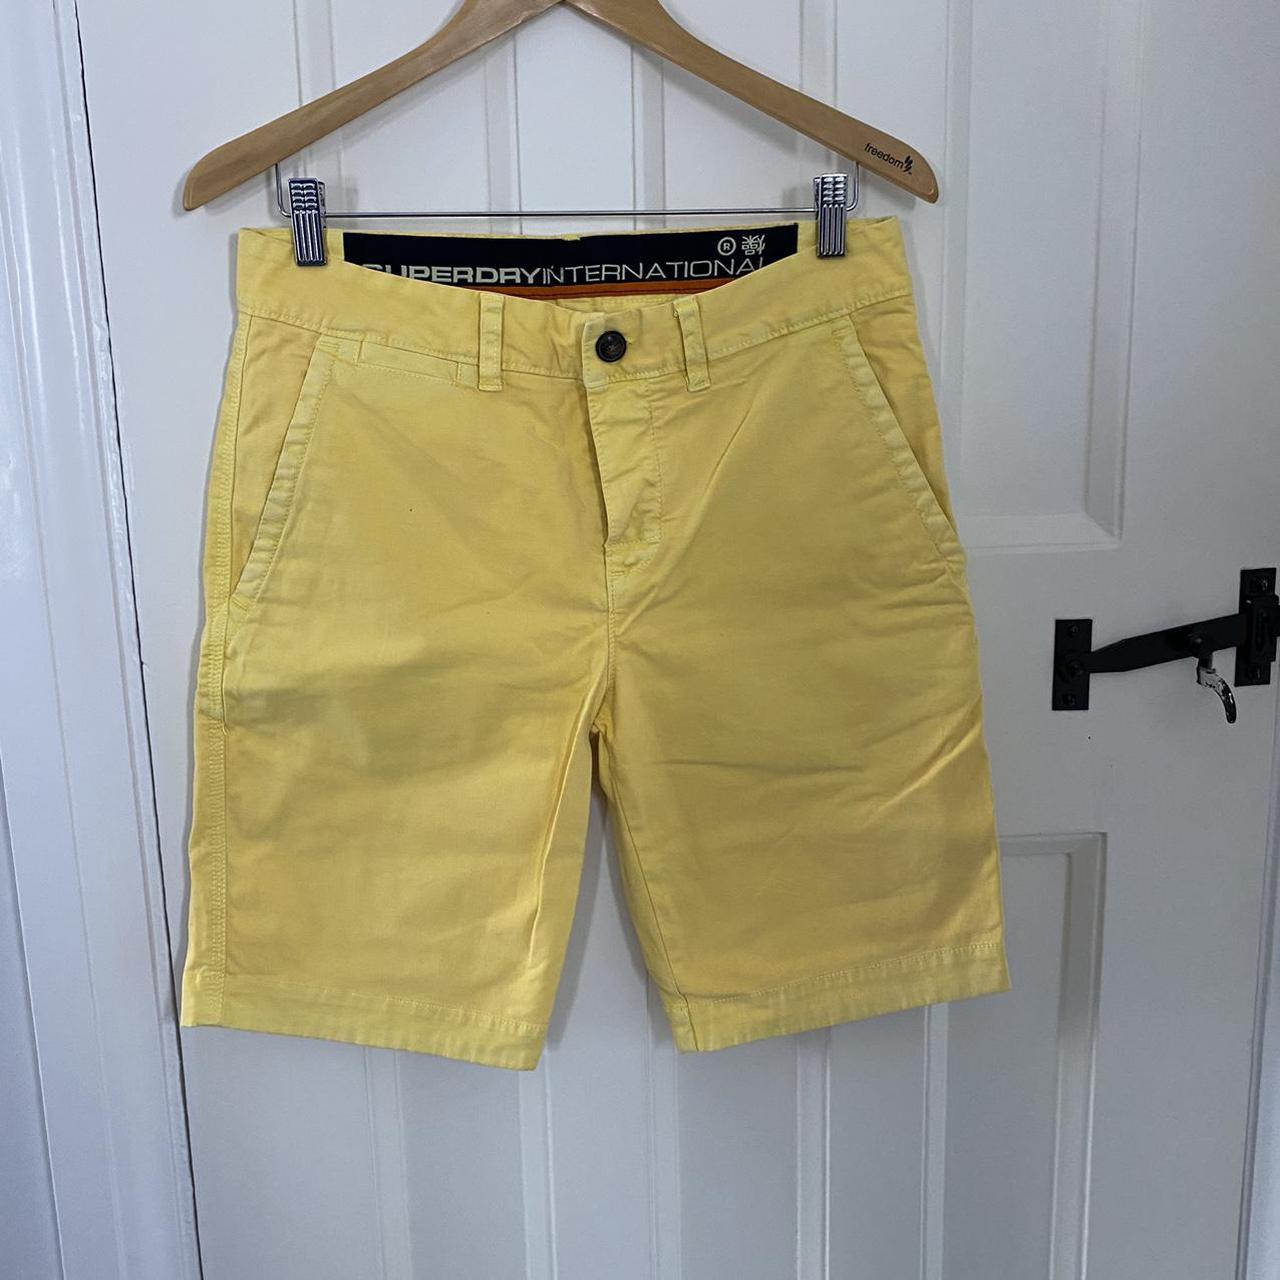 Product Image 1 - Men’s Superdry international shorts

Yellow

Size small

#superdry